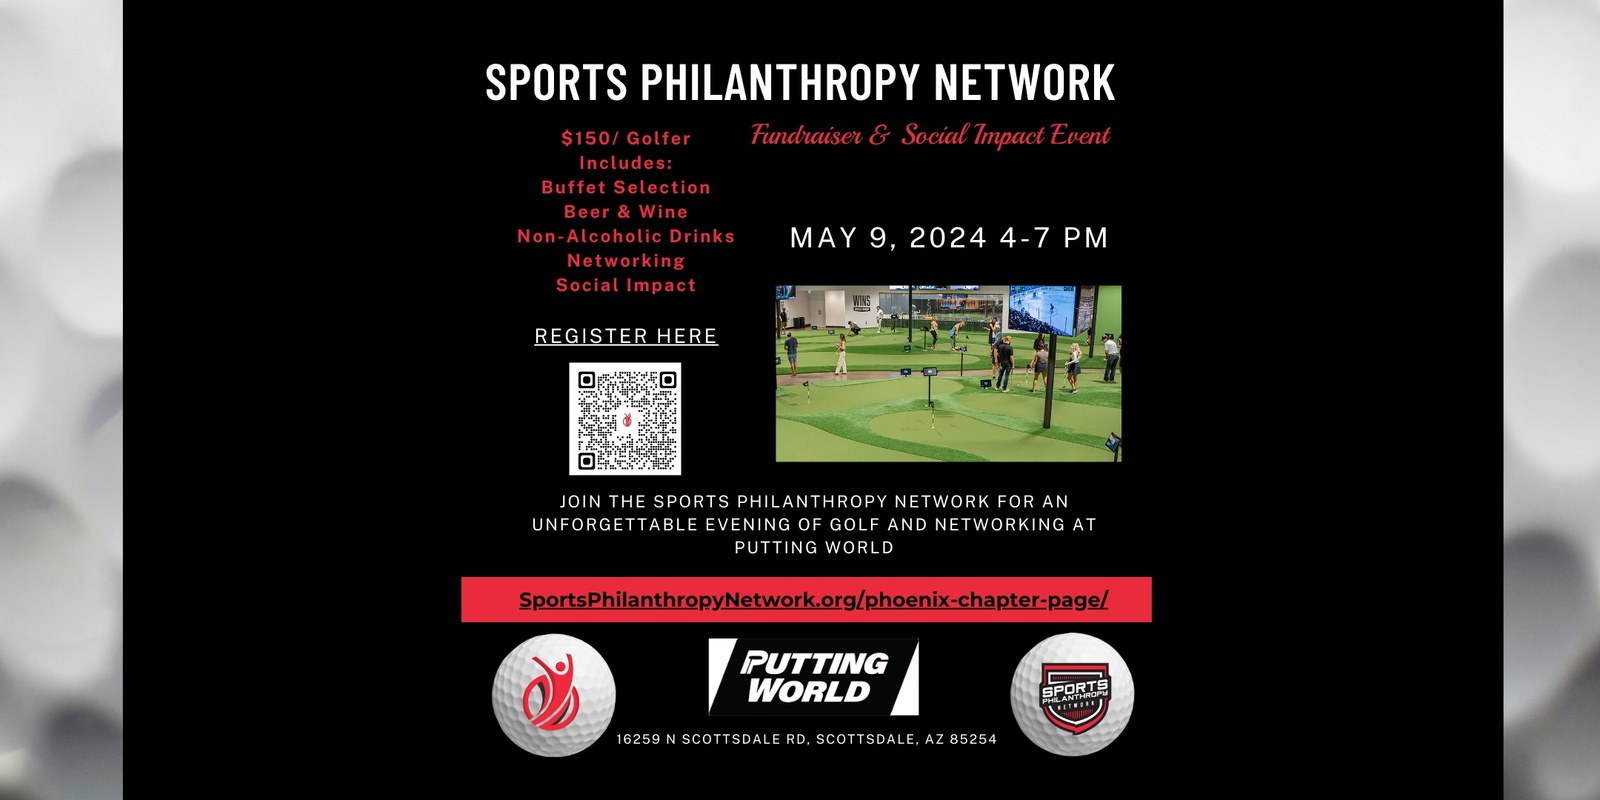 Banner image for Sports Philanthropy Network Phoenix Putting World (Thursday, May 9, 2024)